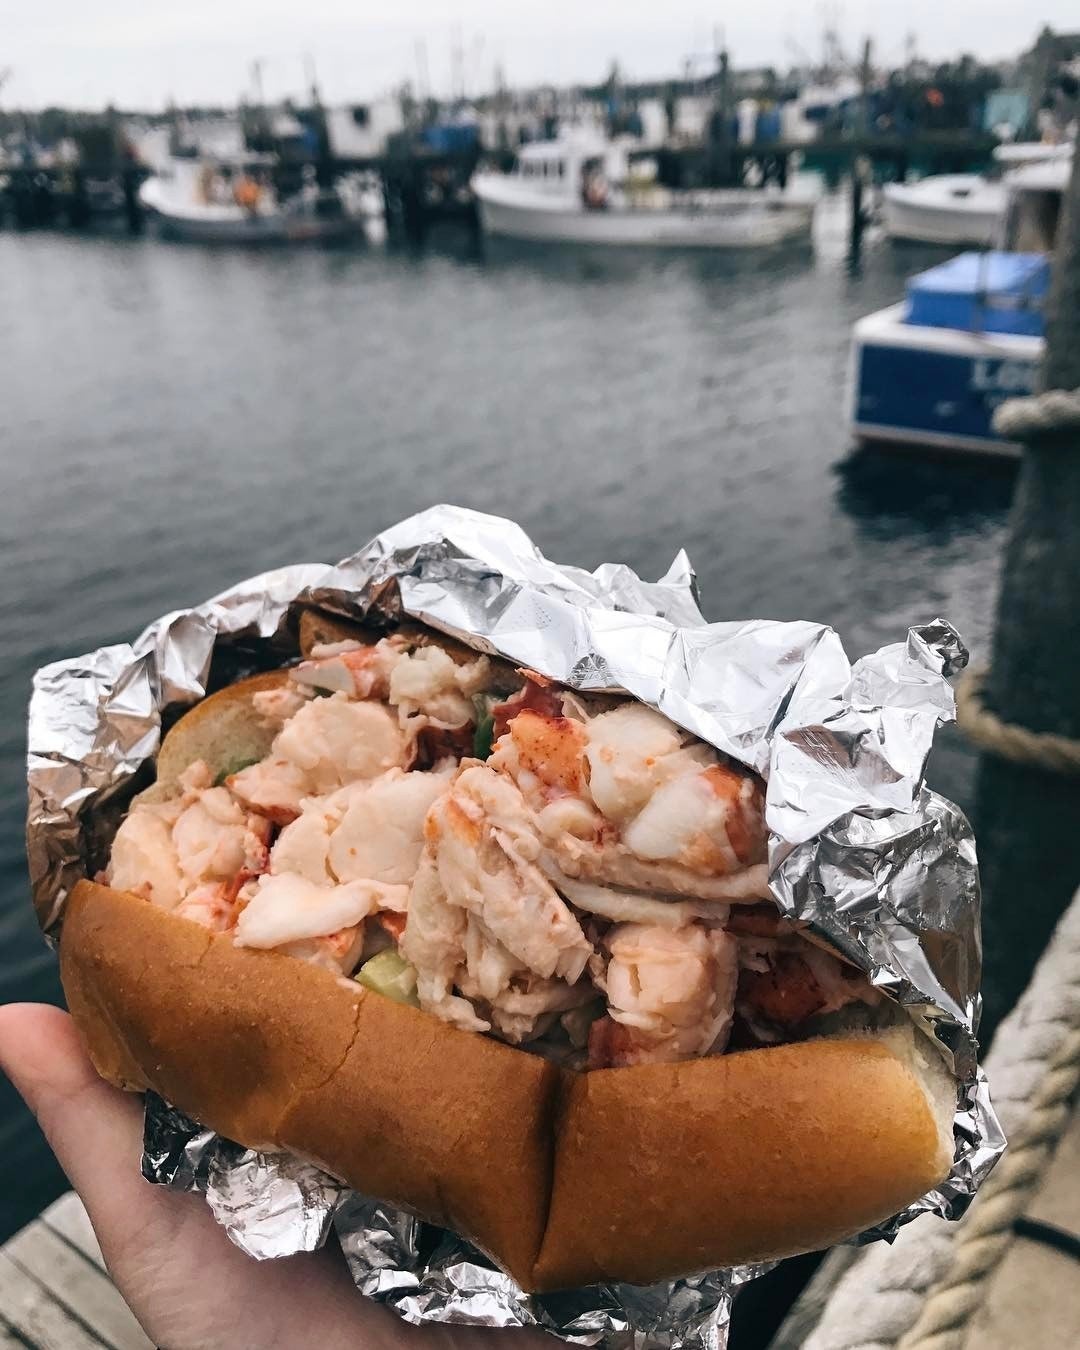 a lobster roll